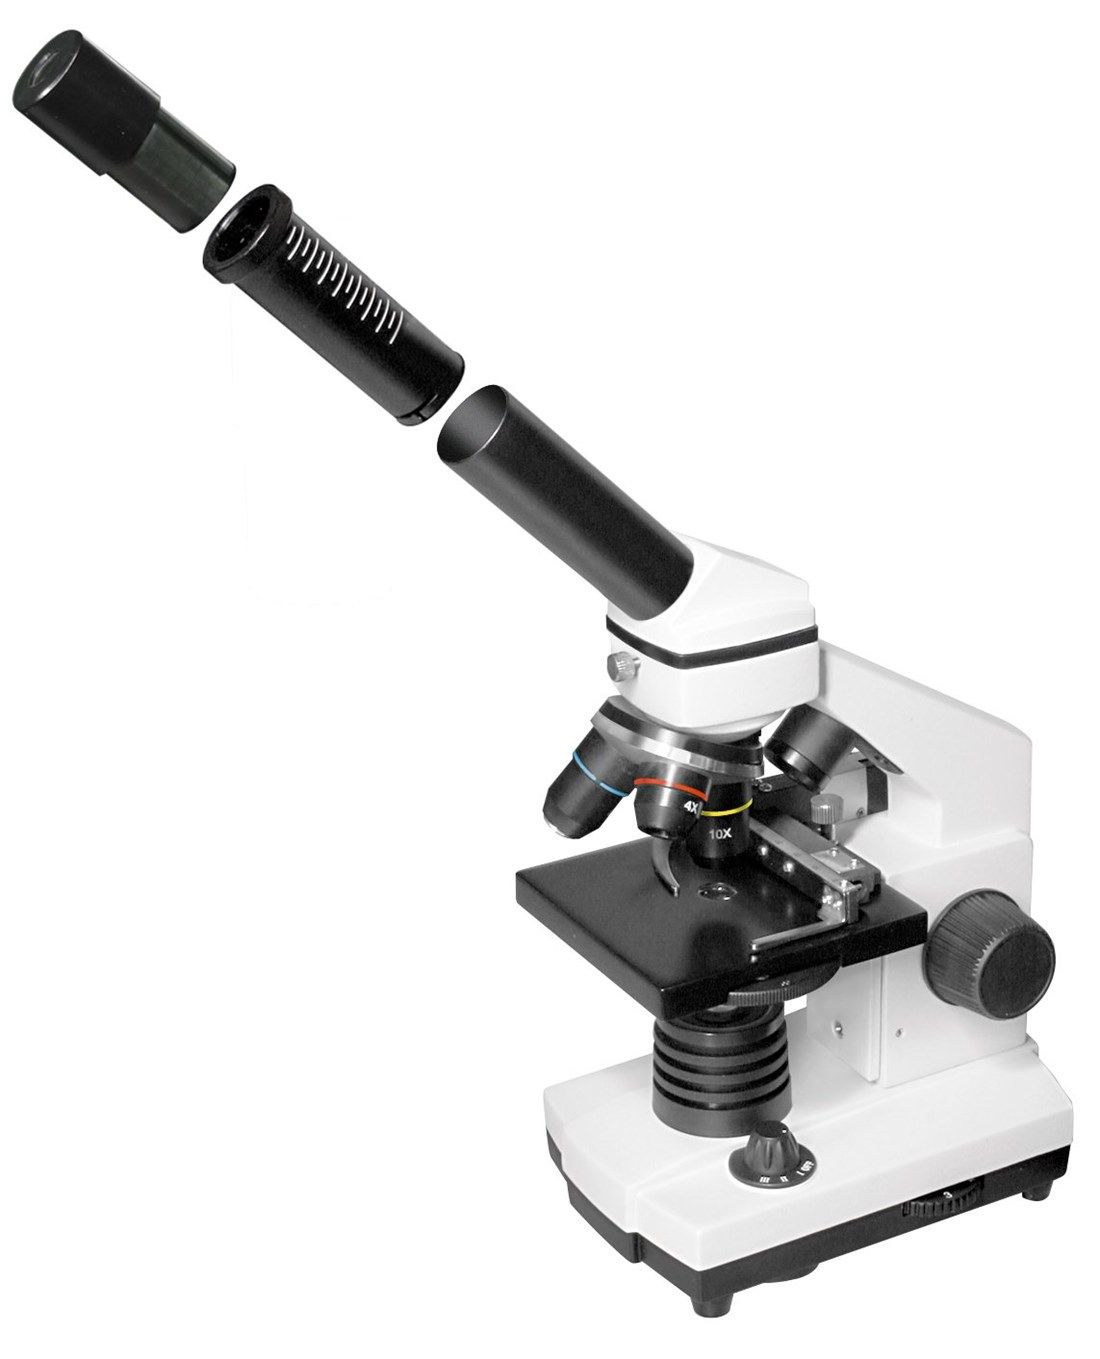 Product Image of BRESSER Biolux NV 20x-1280x Microscope with HD USB camera